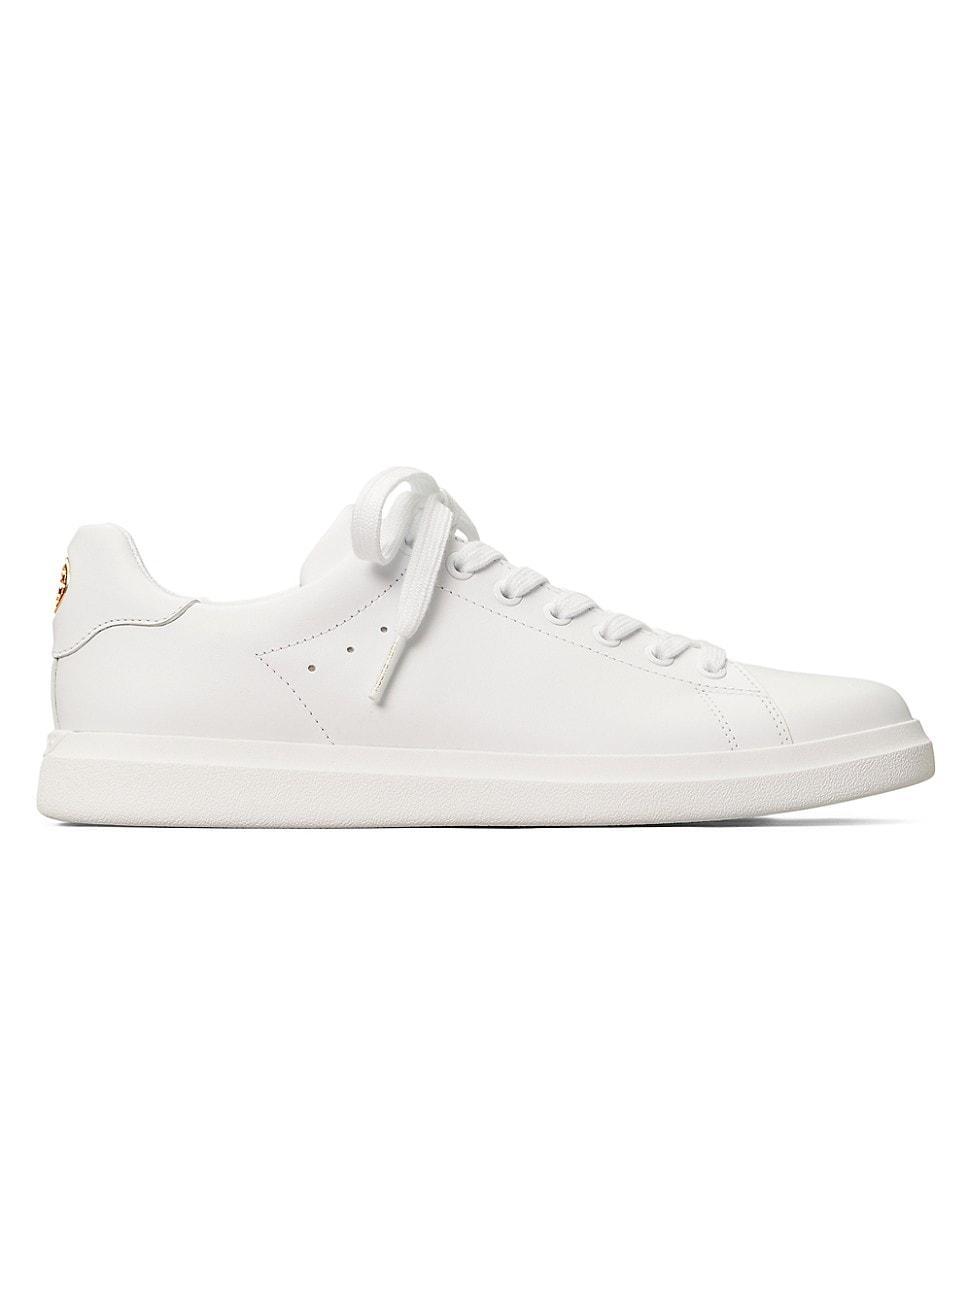 Tory Burch Howell Court Sneaker Product Image